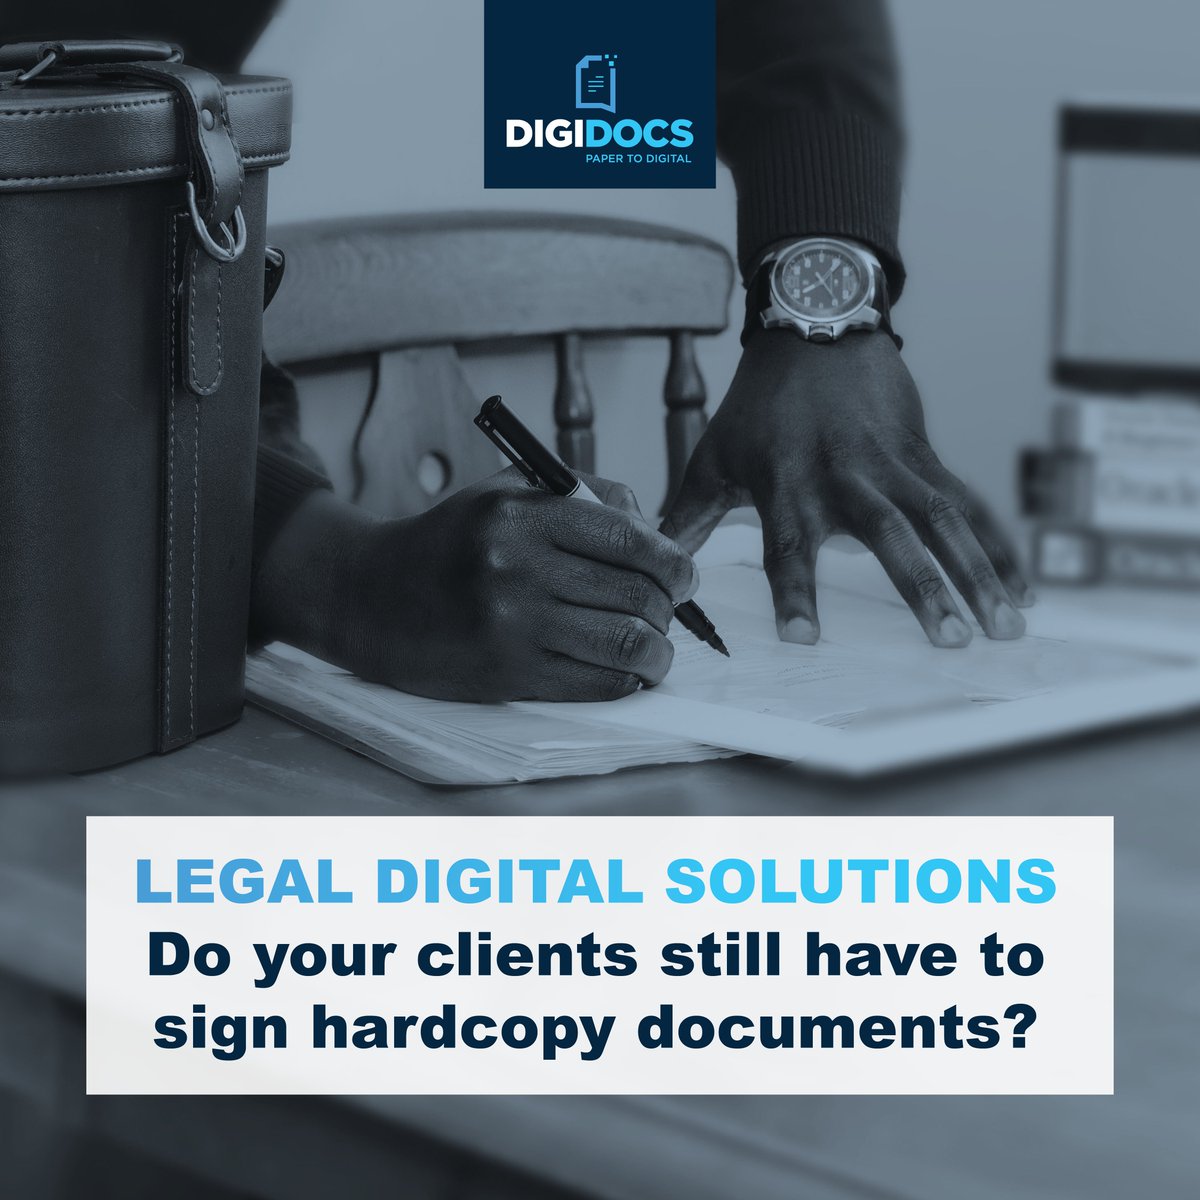 Digidocs can help you to manage the process, particular the facilitation & creation of contracts, version control thereof throughout the process, accessibility of the contract and  monitoring of all changes and amendments.
digidocs.co.za/contact-us/

#paperlessoffice #legalpractices